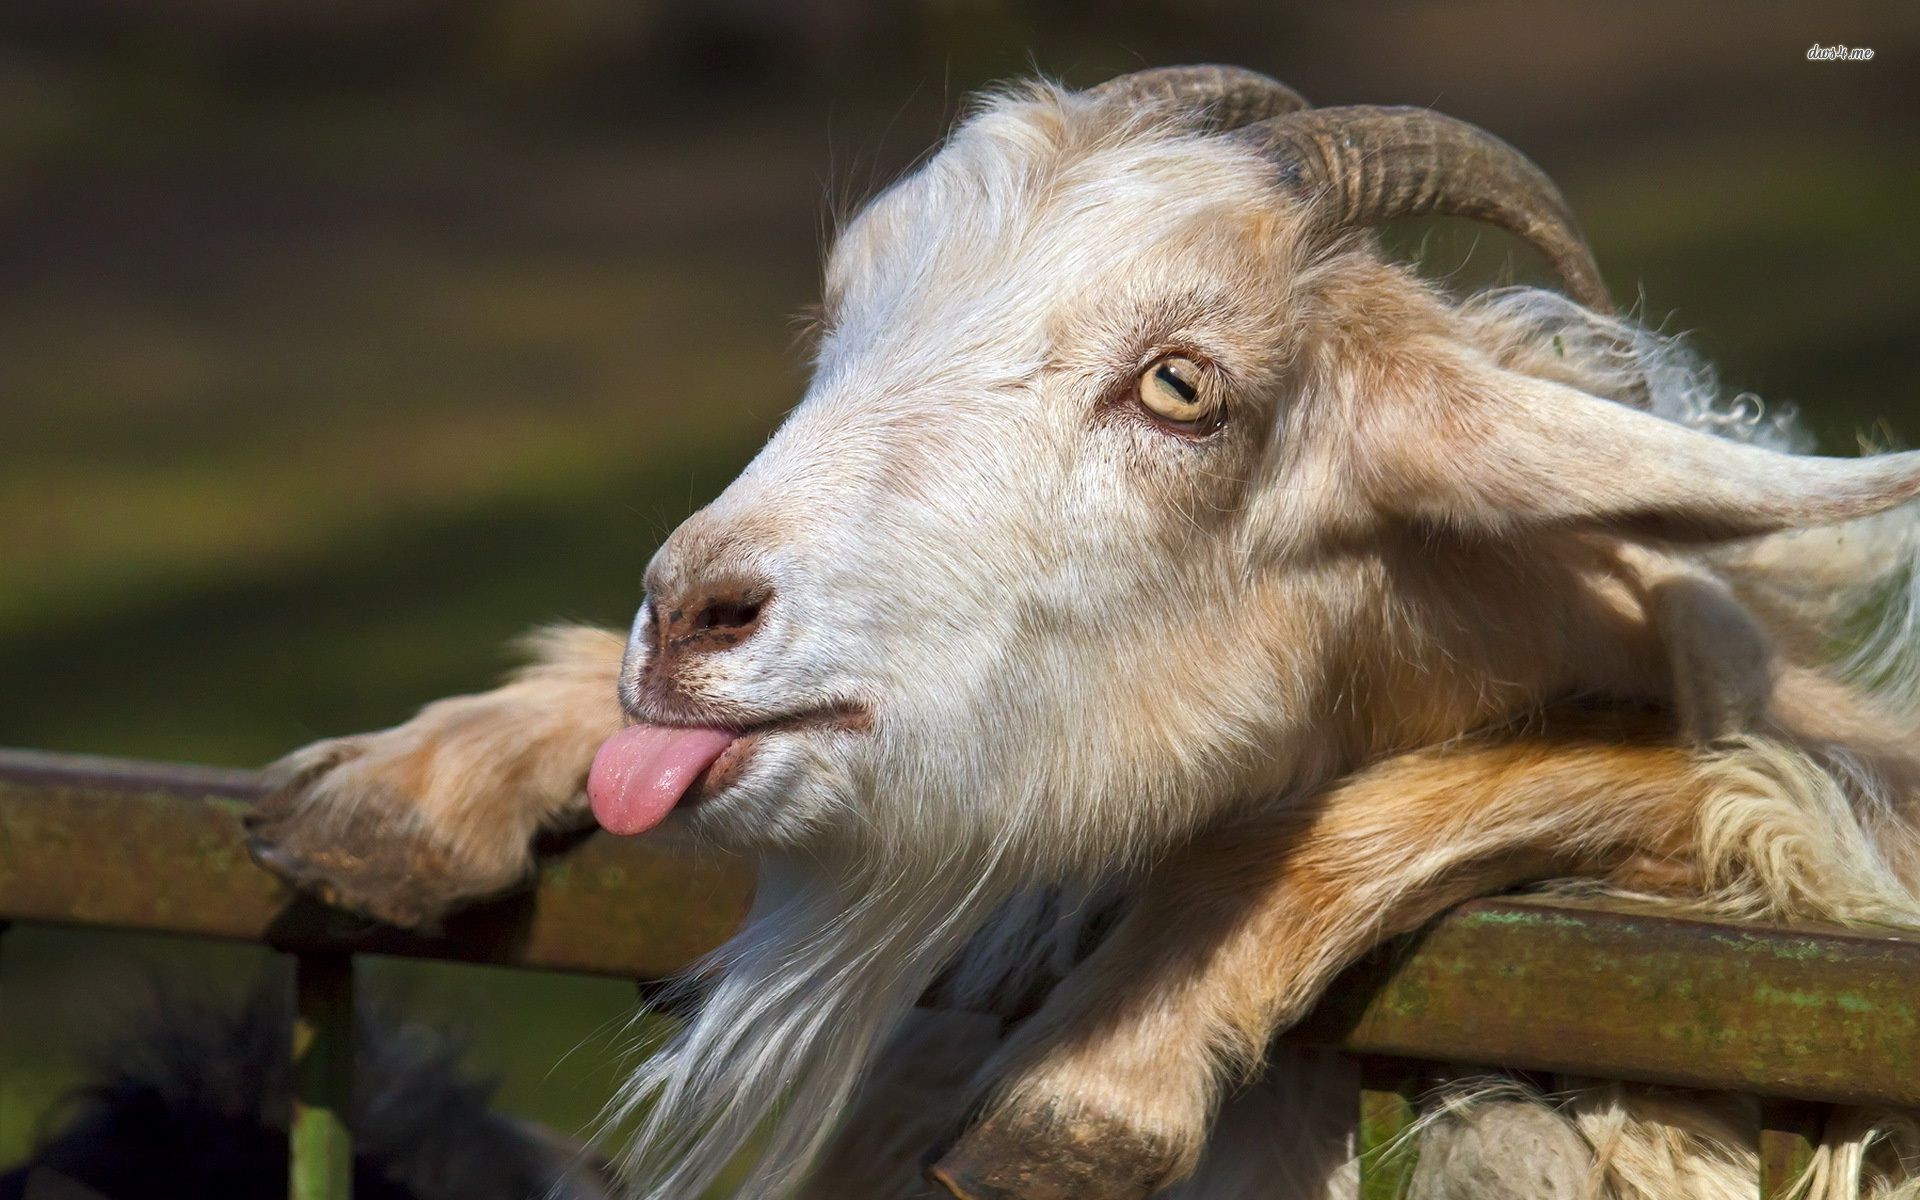 100 Goat Images  Download Free Pictures on Unsplash